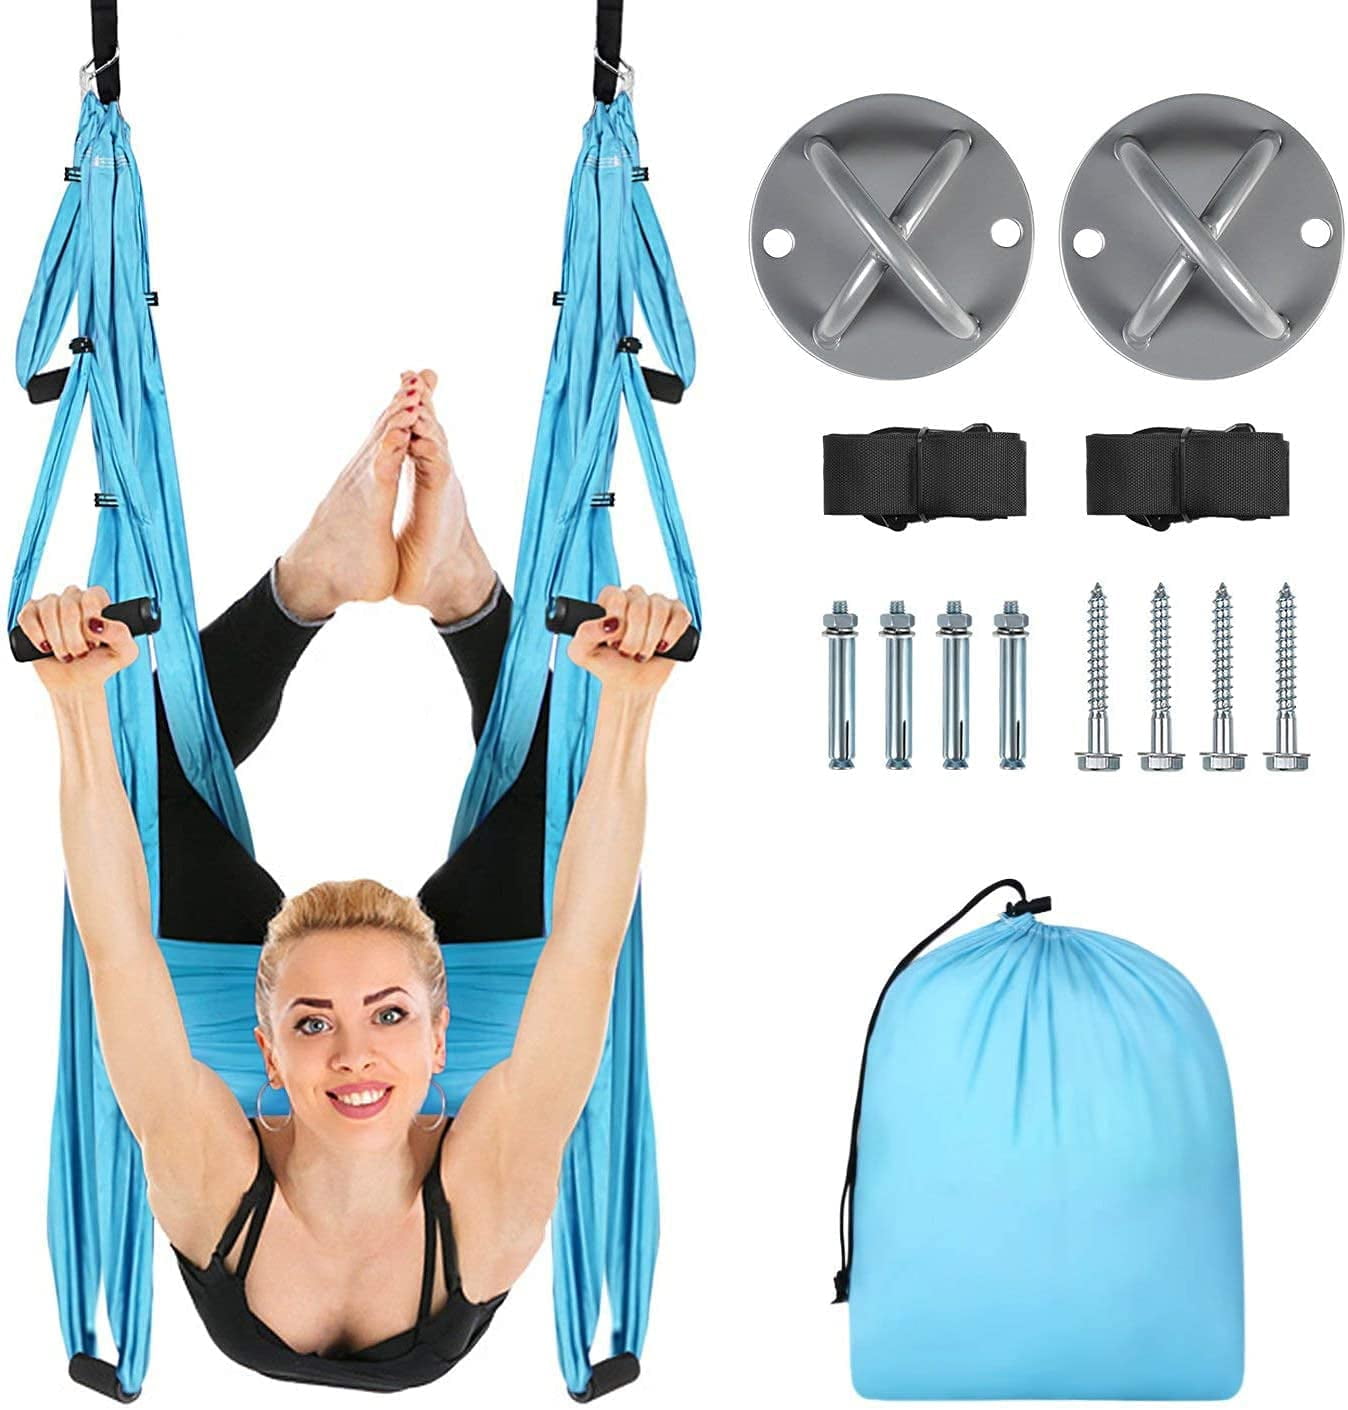 Yoga Hammock Trapeze Sling Inversion Tool For Gym Home Fitness